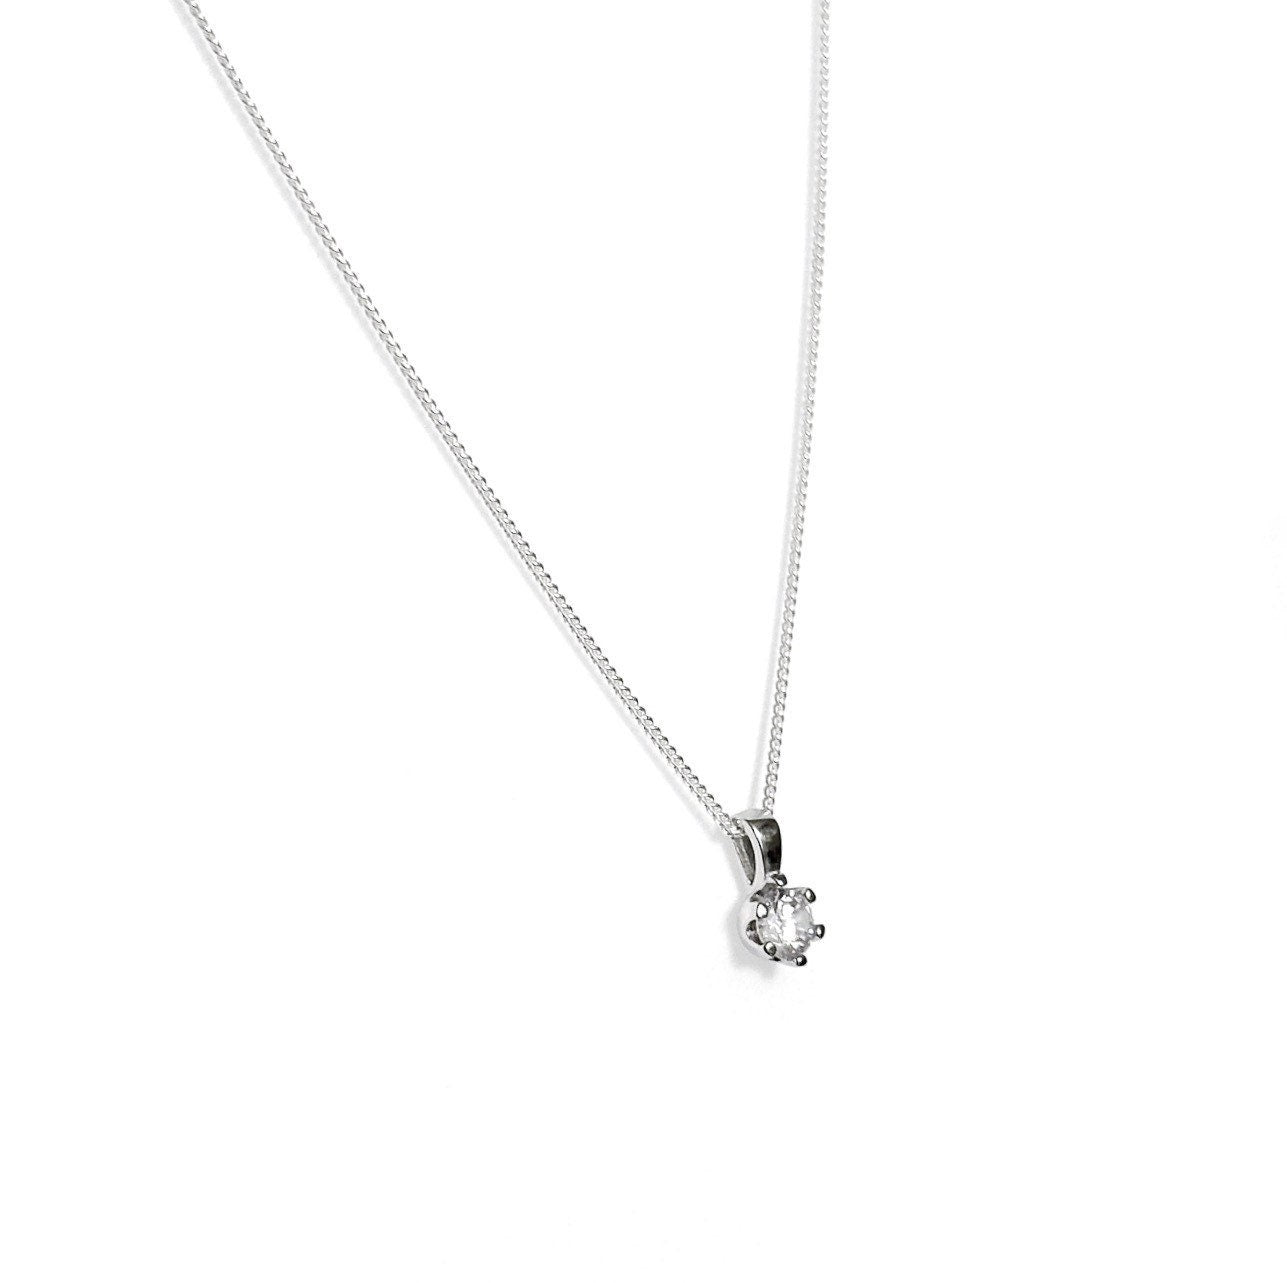 Shining solitaire necklace (sterling silver, cubic zirconia)